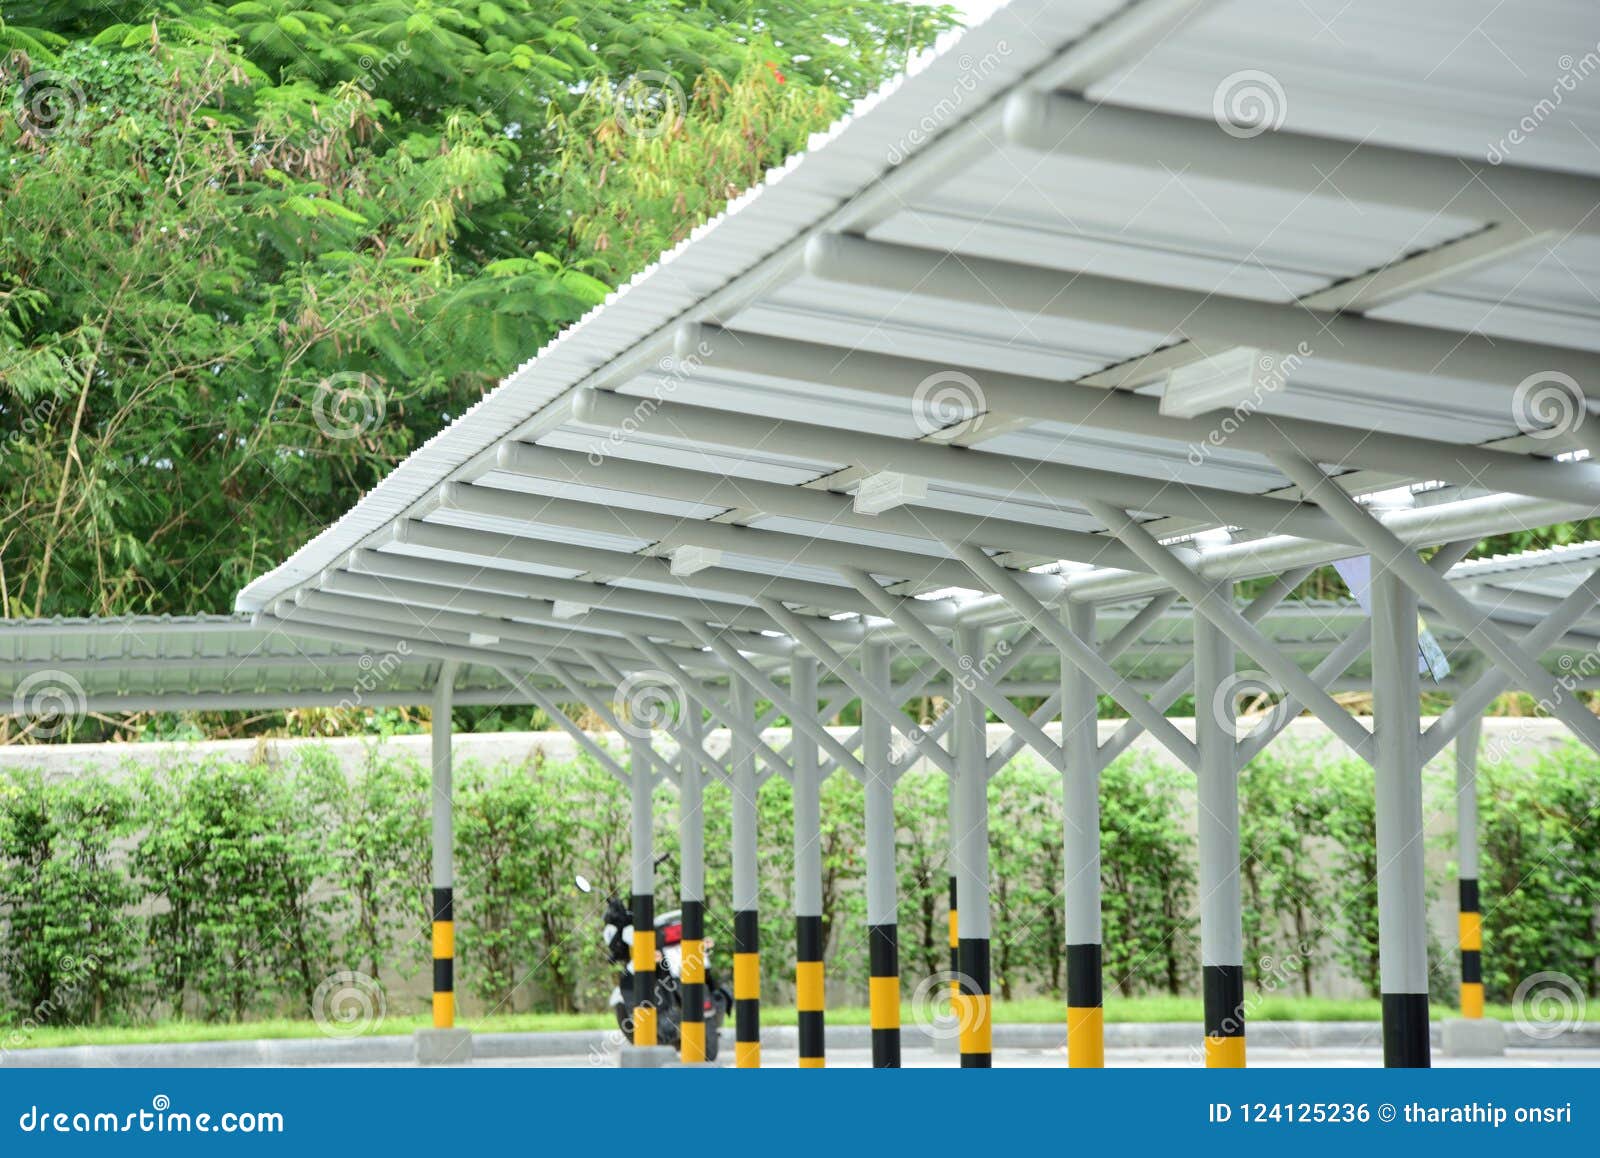 Sun Roof Structure The Parking Lot Stock Photo Image Of